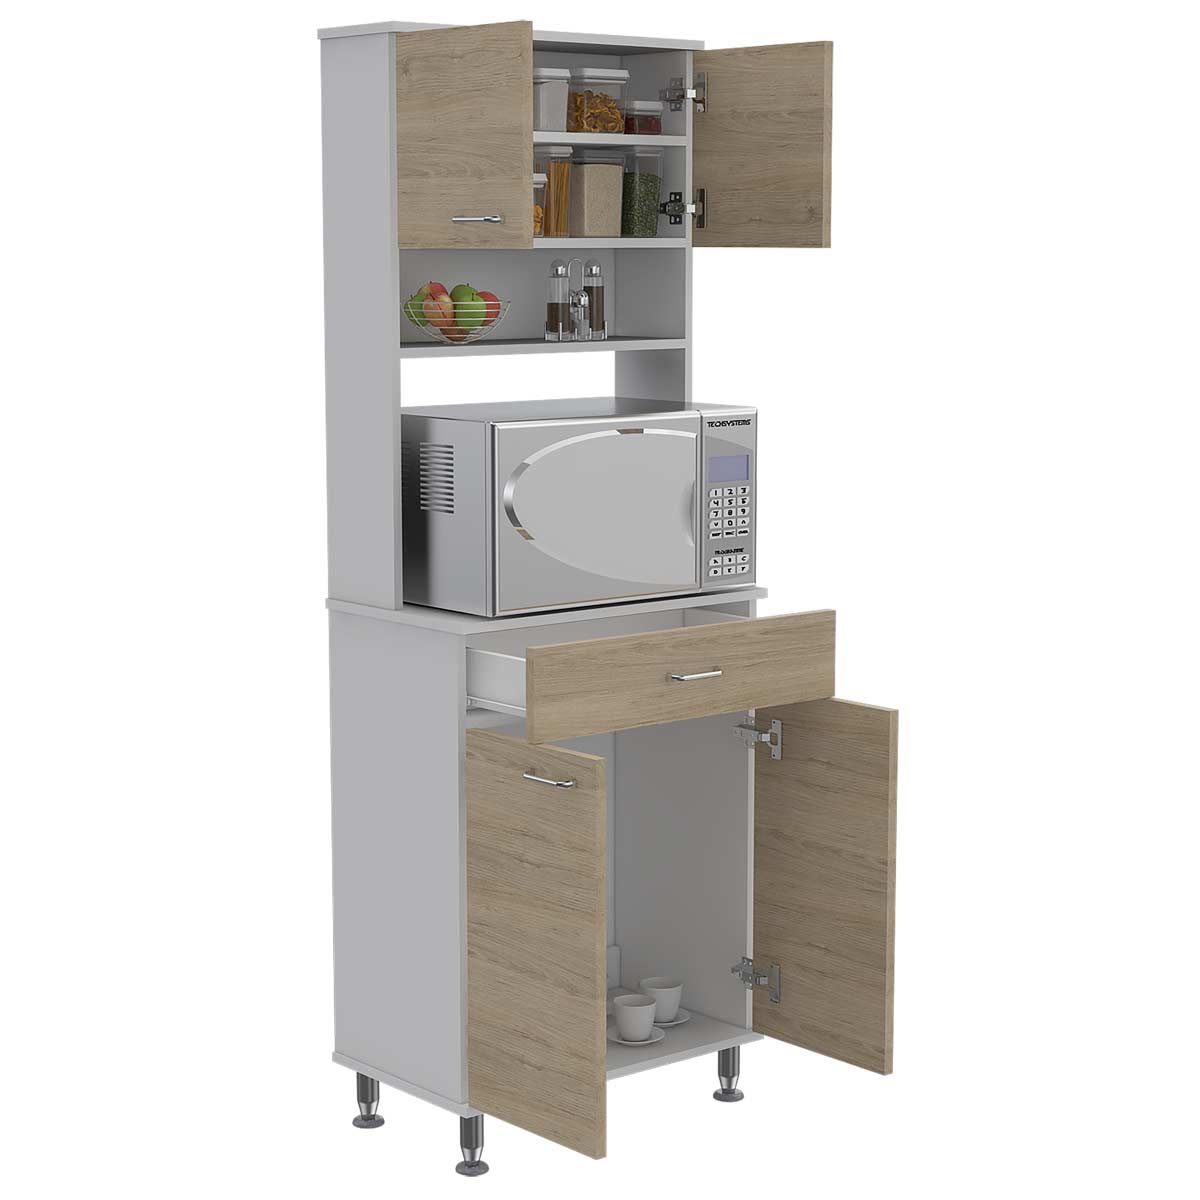 KITCHEN-60-FRONTAL-LATERAL-ABIERTA-DECORADA-ROVERE